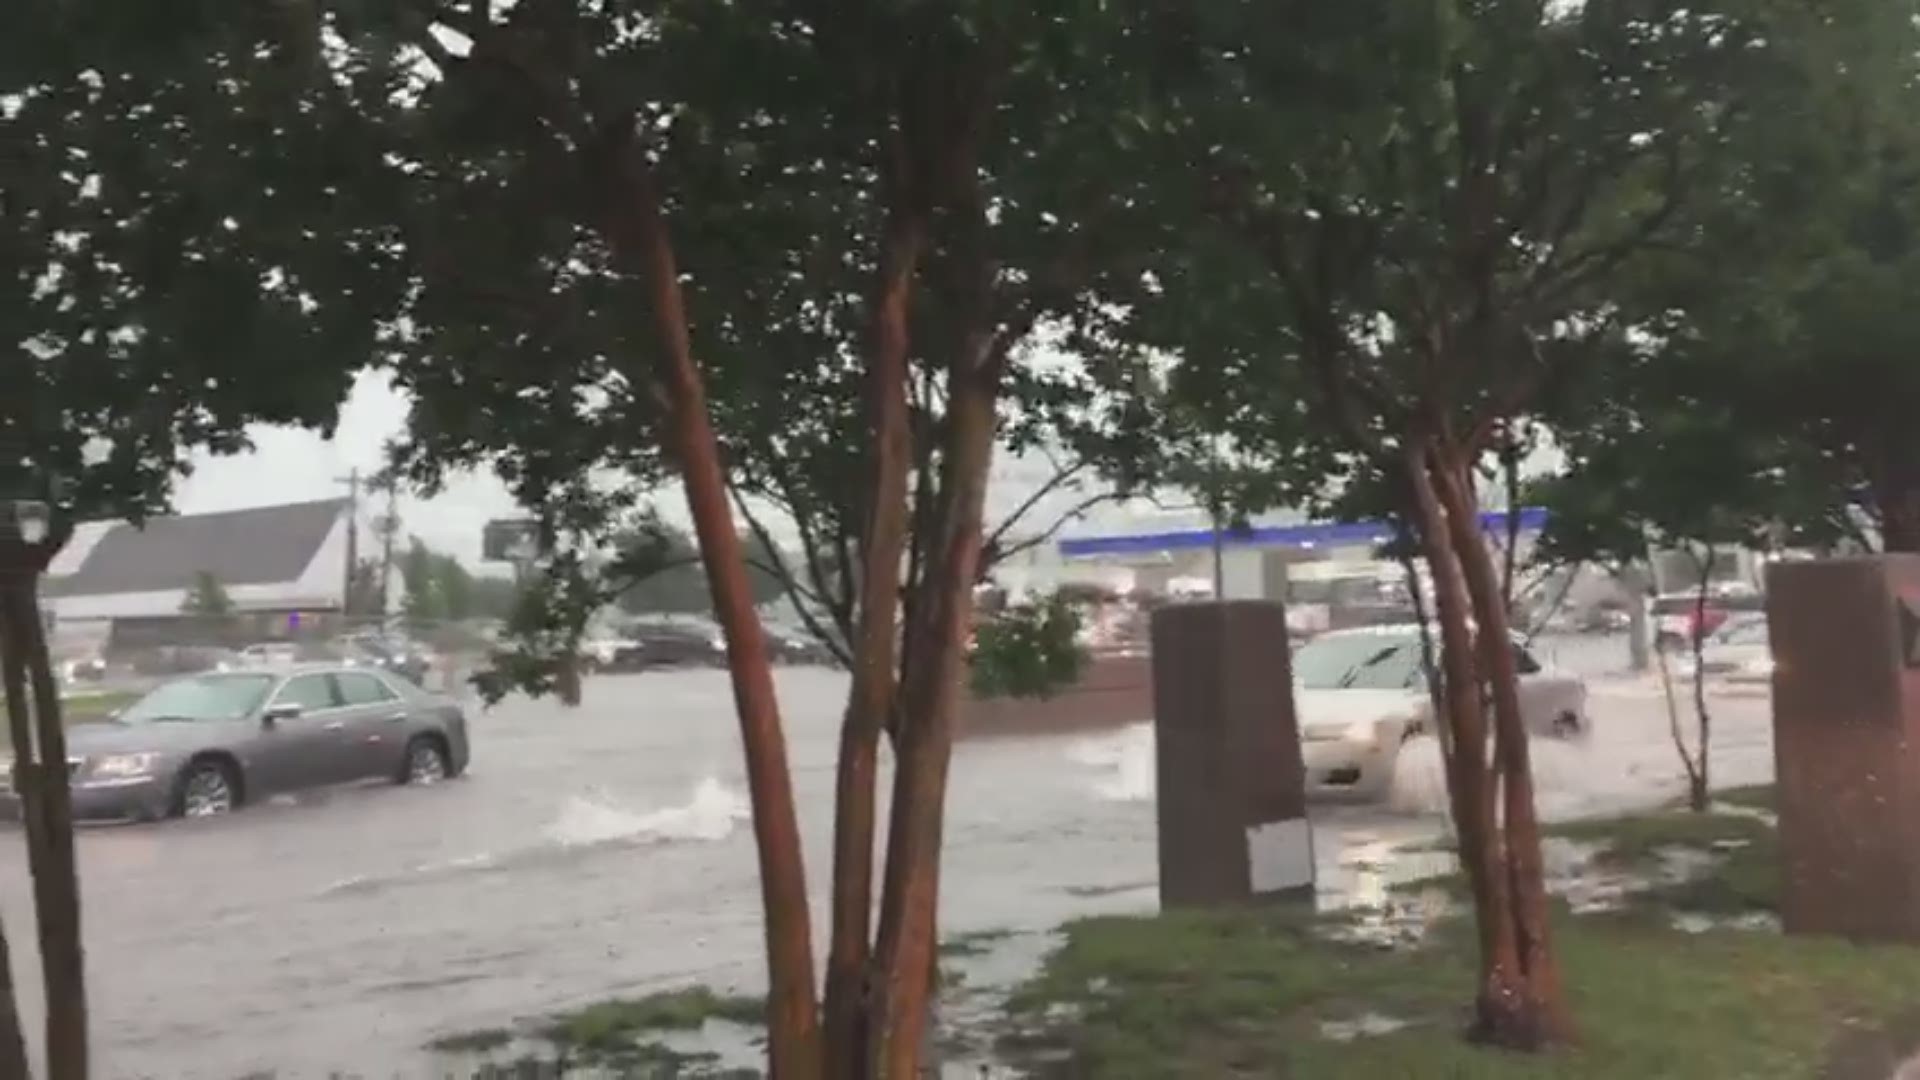 A viewer captured this video of high waters at Dallas Love Field Airport Saturday afternoon. Stay safe out there!